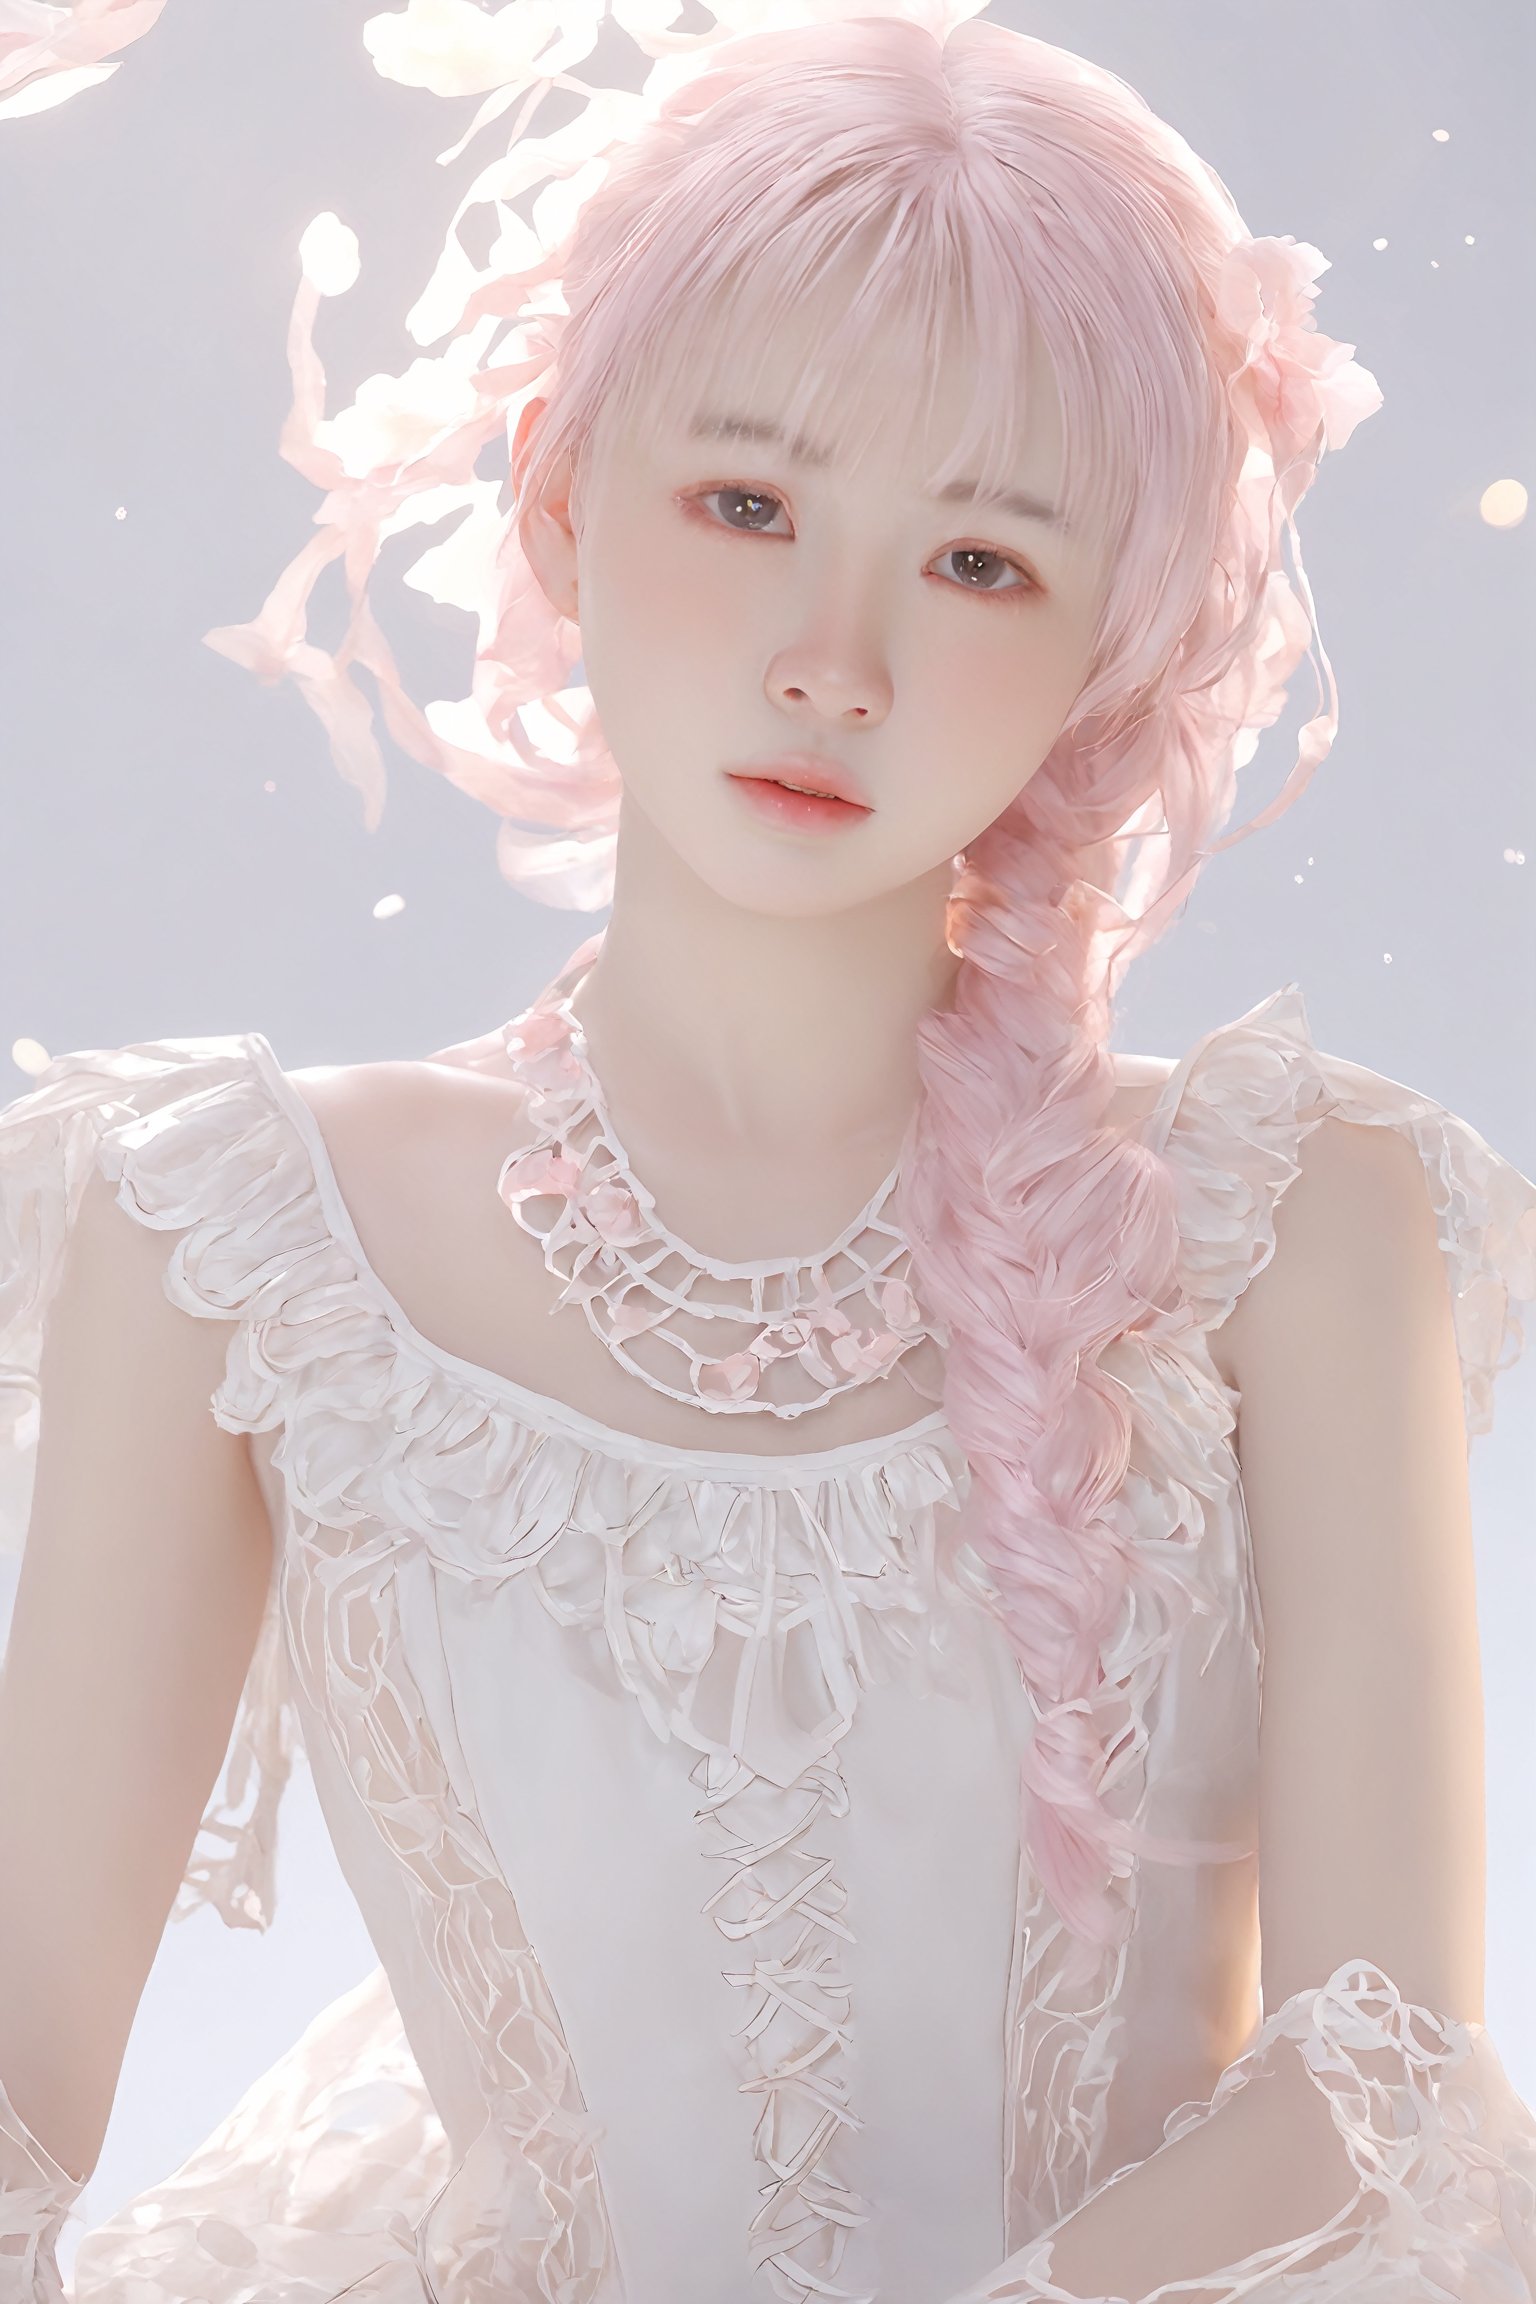 A majestic masterpiece depicting Kanna Kamui, a stunning 16-year-old girl with a flat chest and breathtakingly pretty face, posing solo in a full-body shot against a simple, soft background. Her light pink hair flows delicately, accentuating her youthful charm. The lighting is warm and inviting, casting a gentle glow on her porcelain-like skin. Every detail is meticulously rendered in 8K ultra-high definition, showcasing Kanna's perfect anatomy with precision and accuracy.